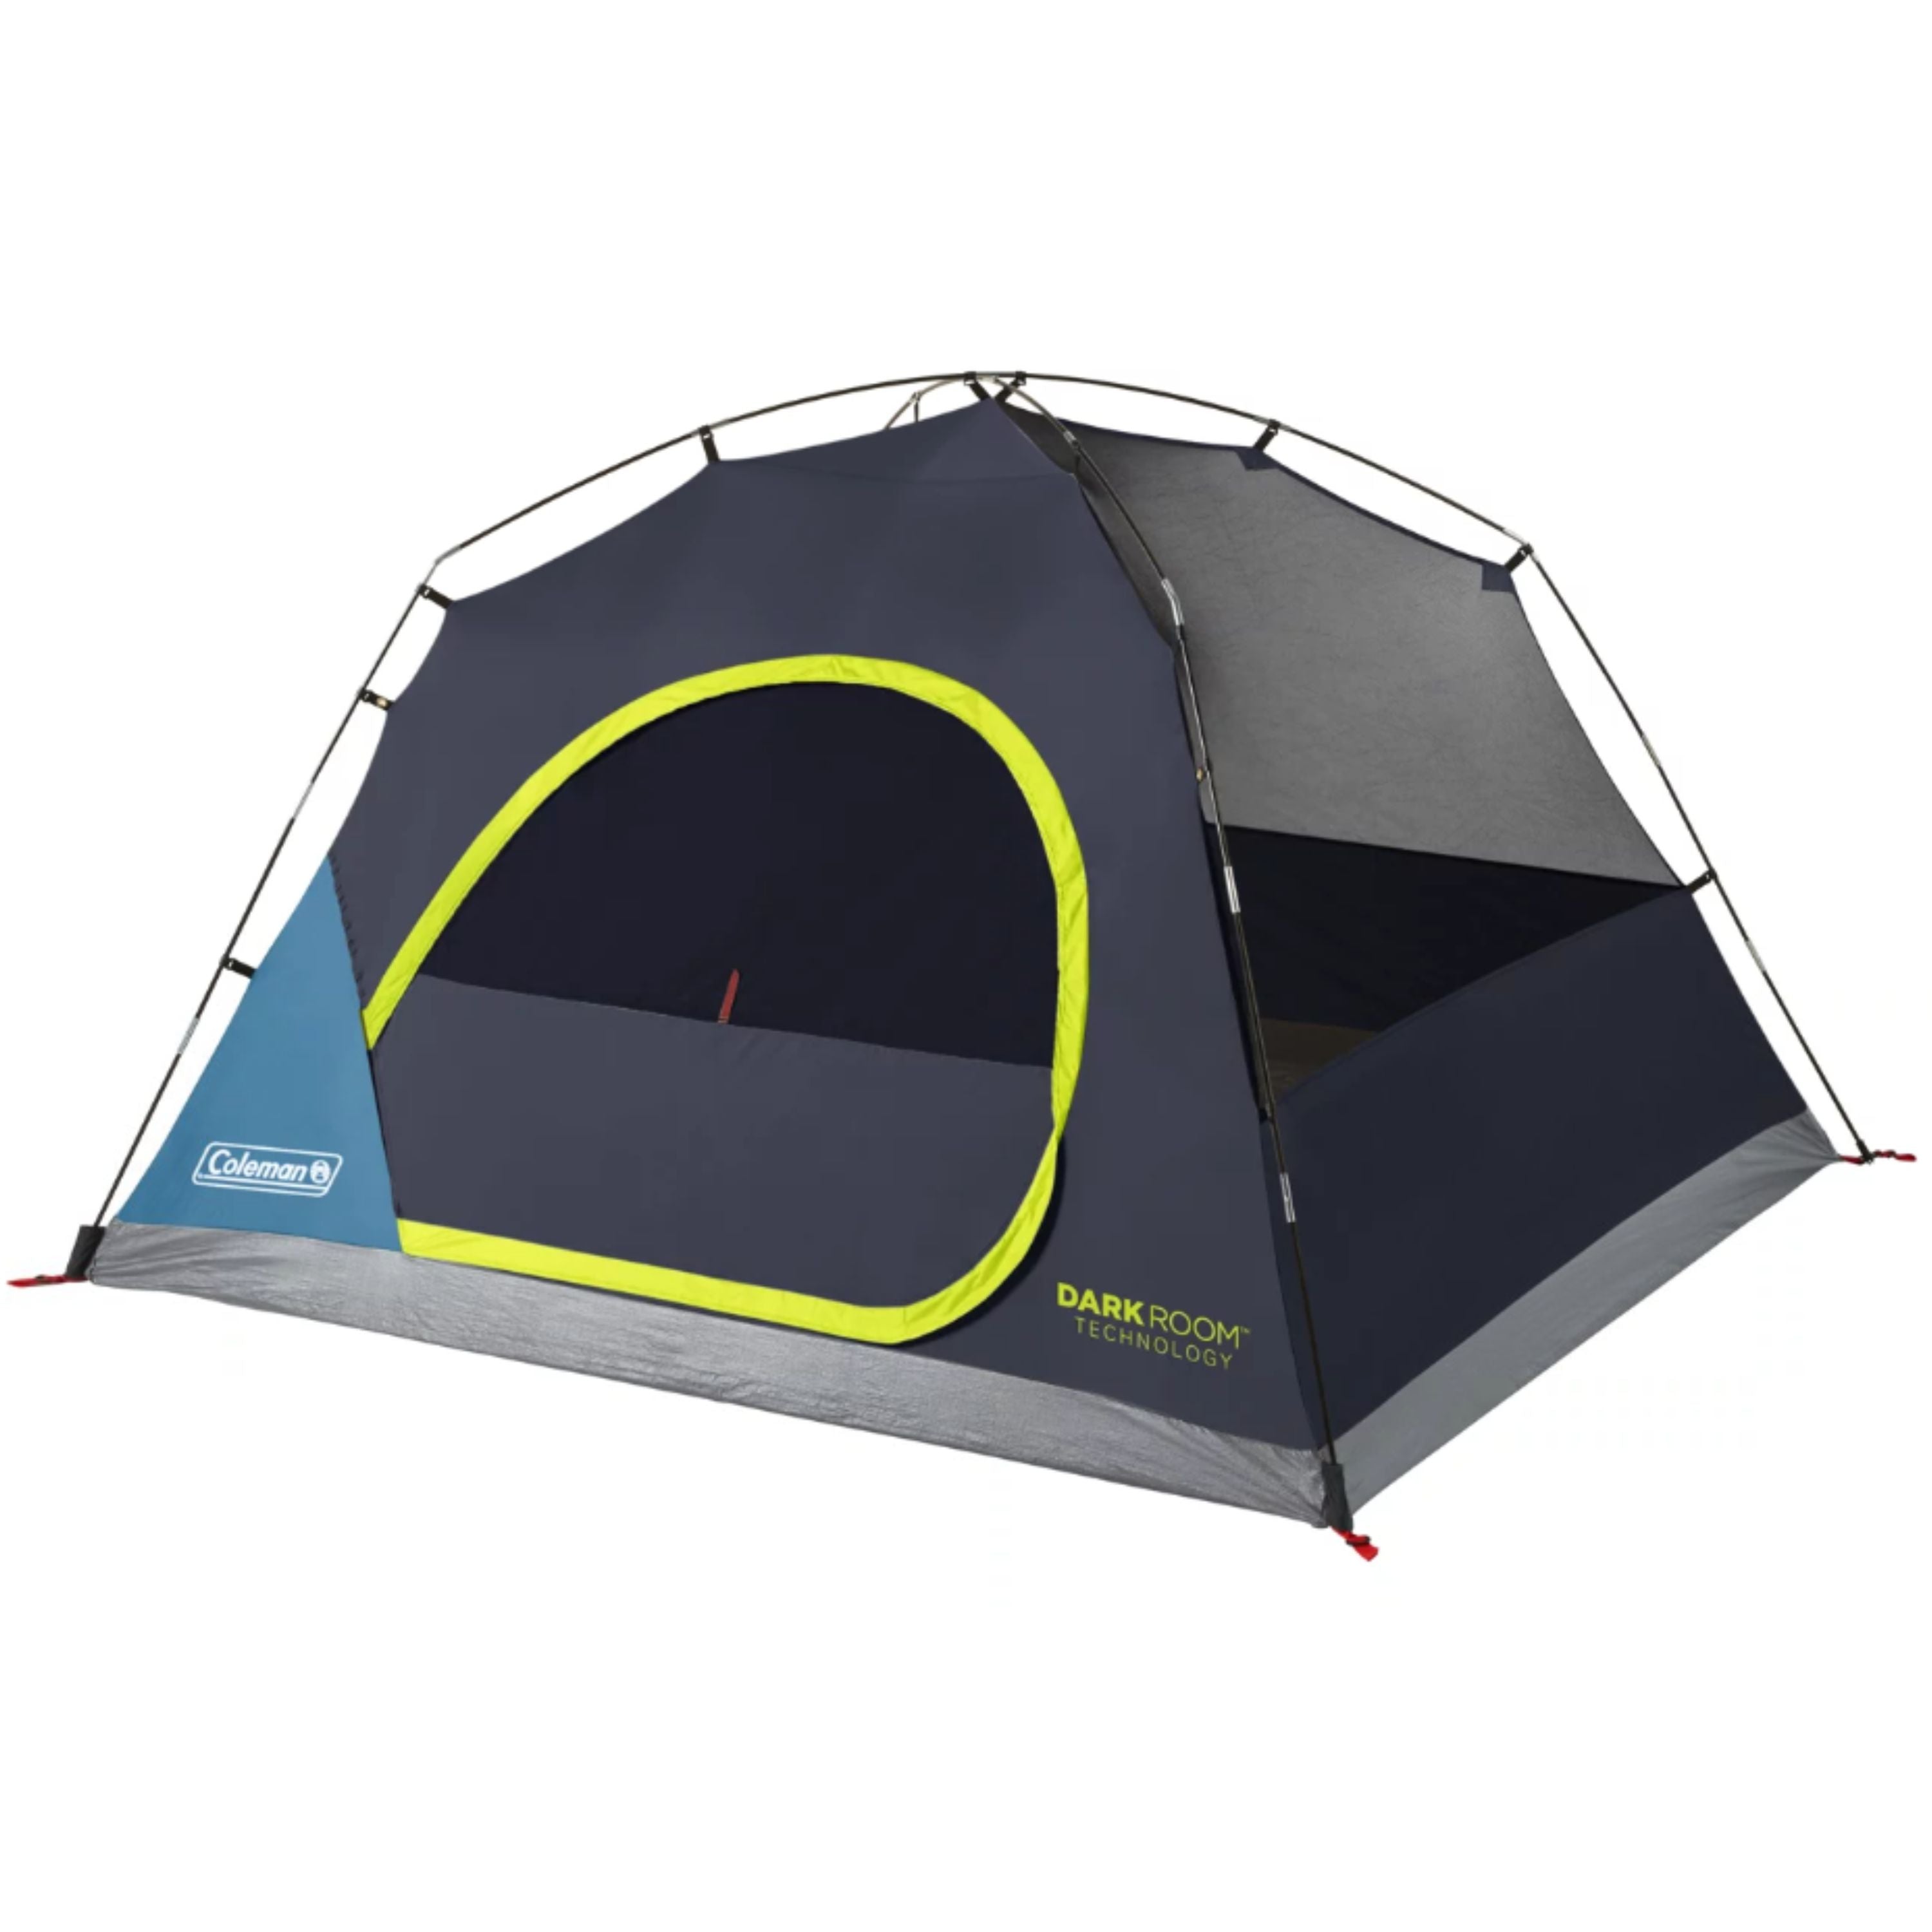 "Dark Room Skydome" tent - 4 persons